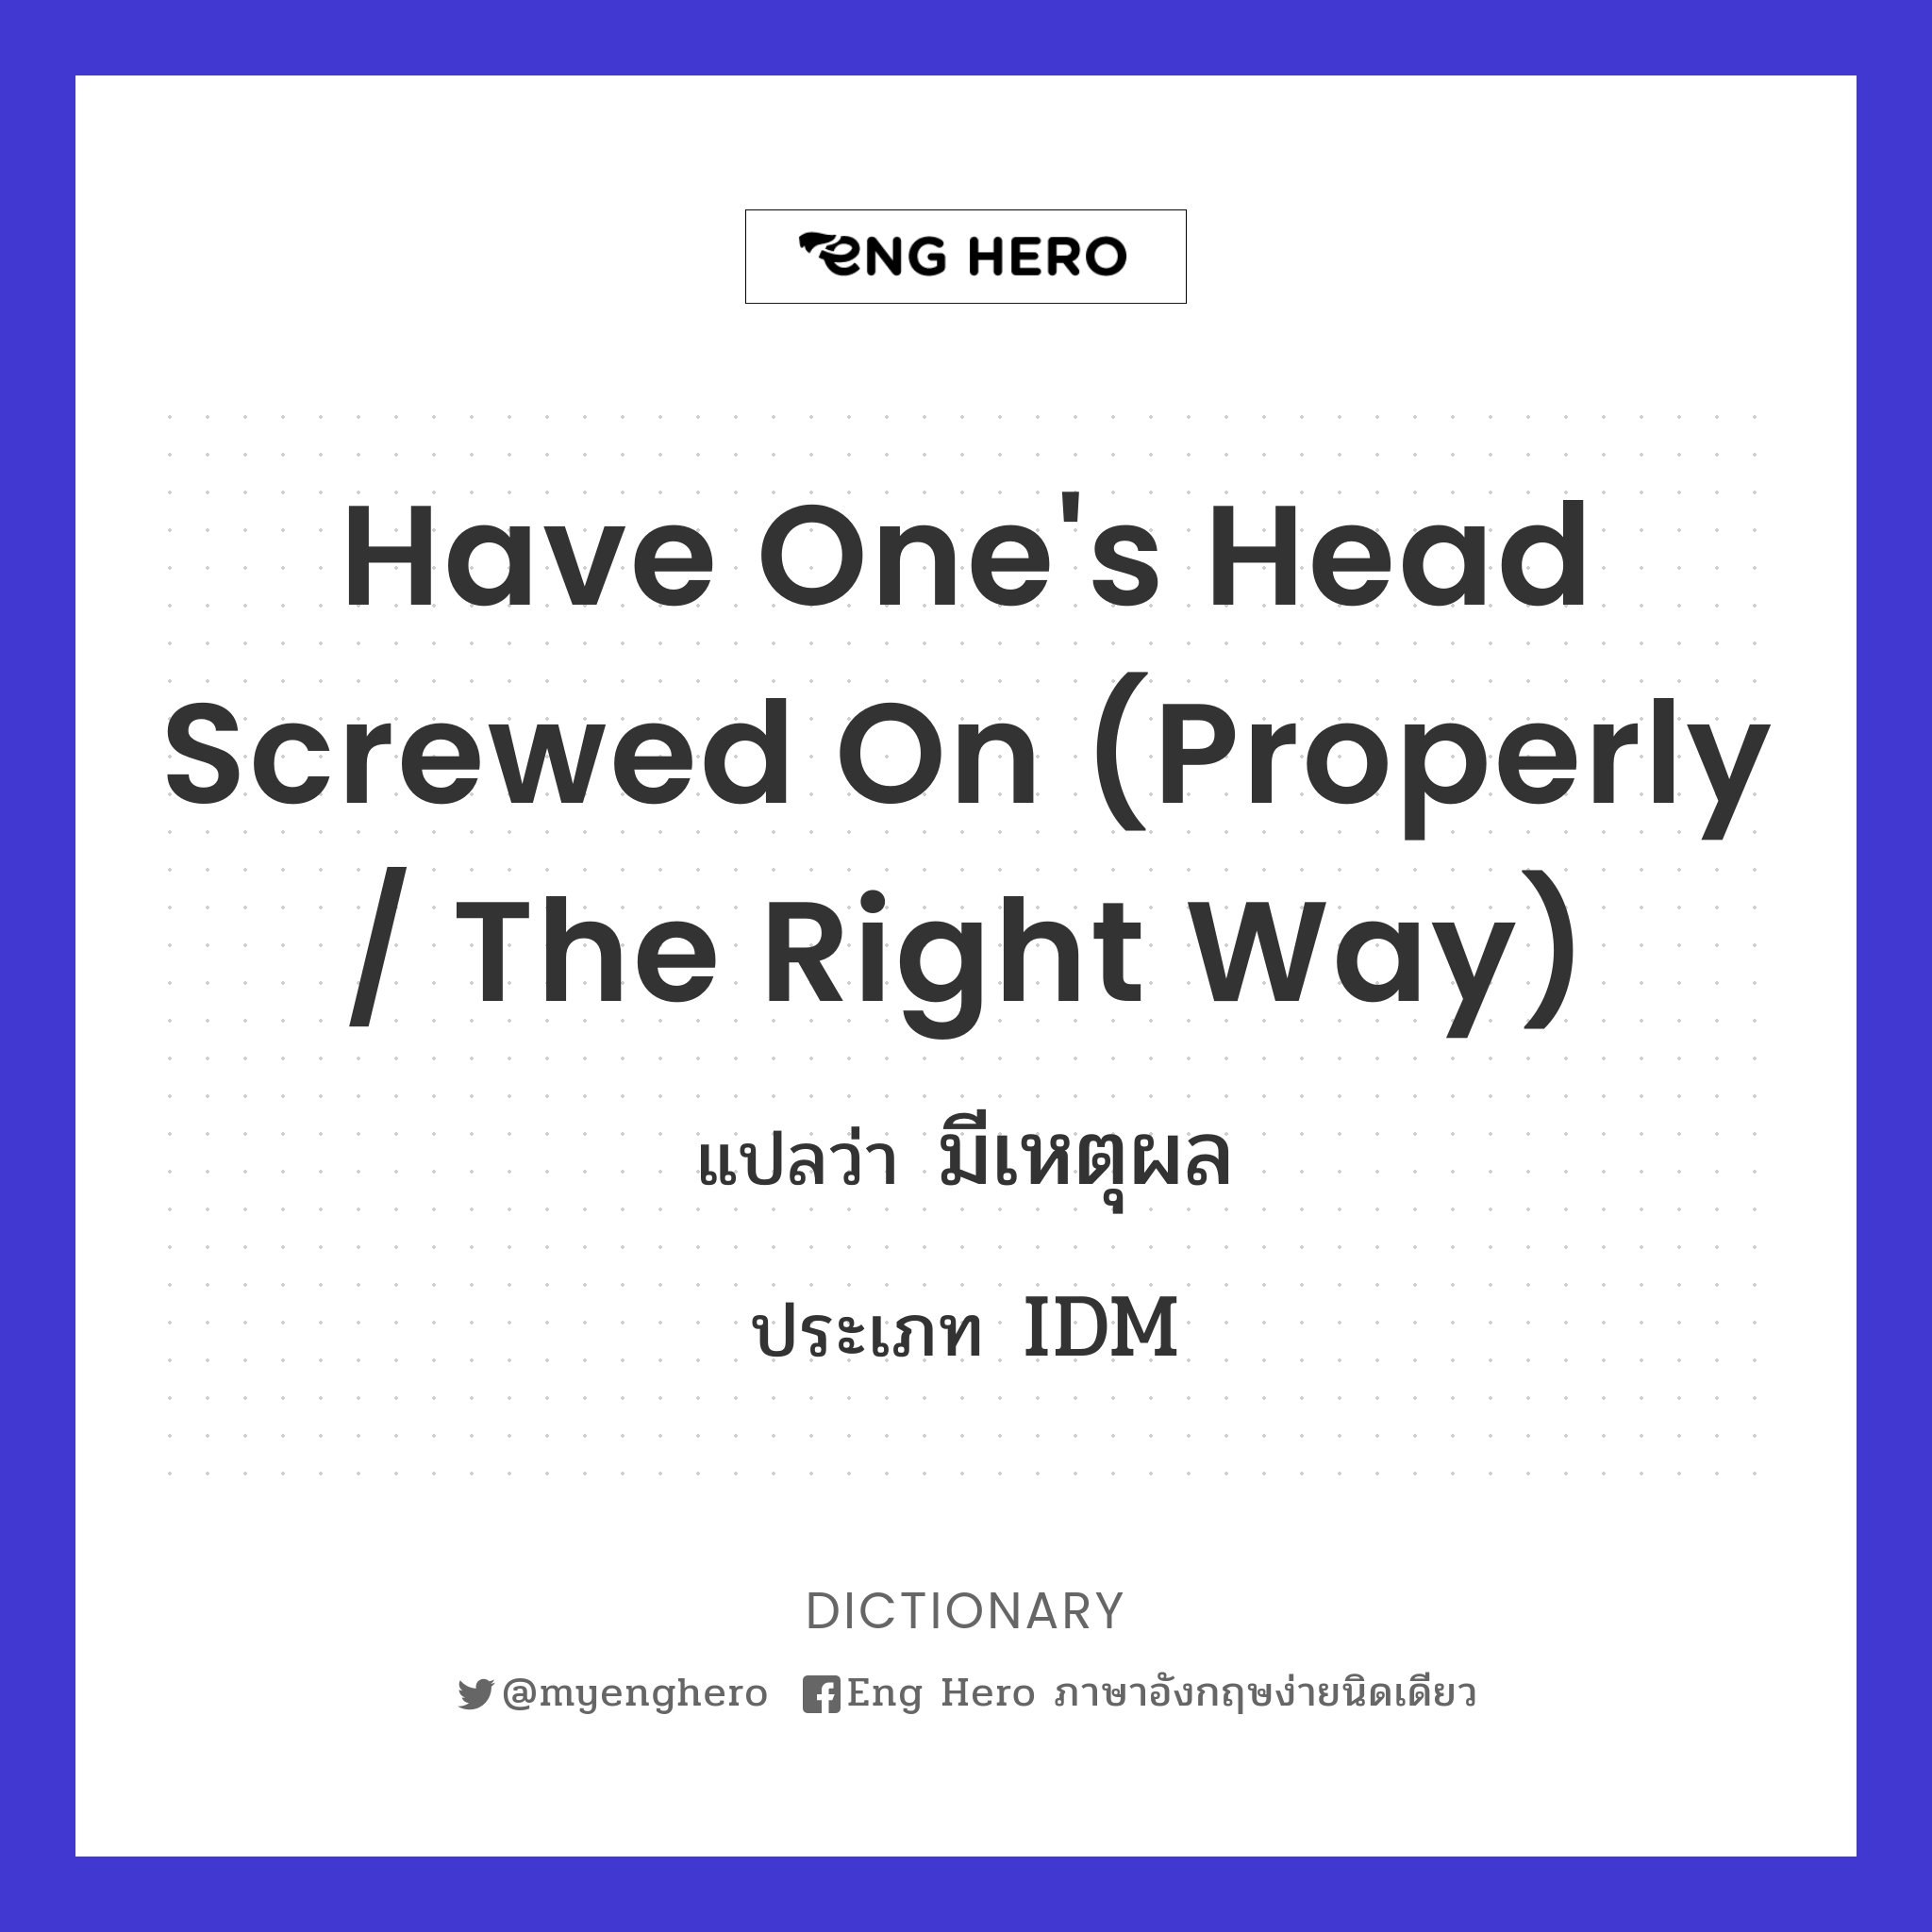 have one's head screwed on (properly / the right way)